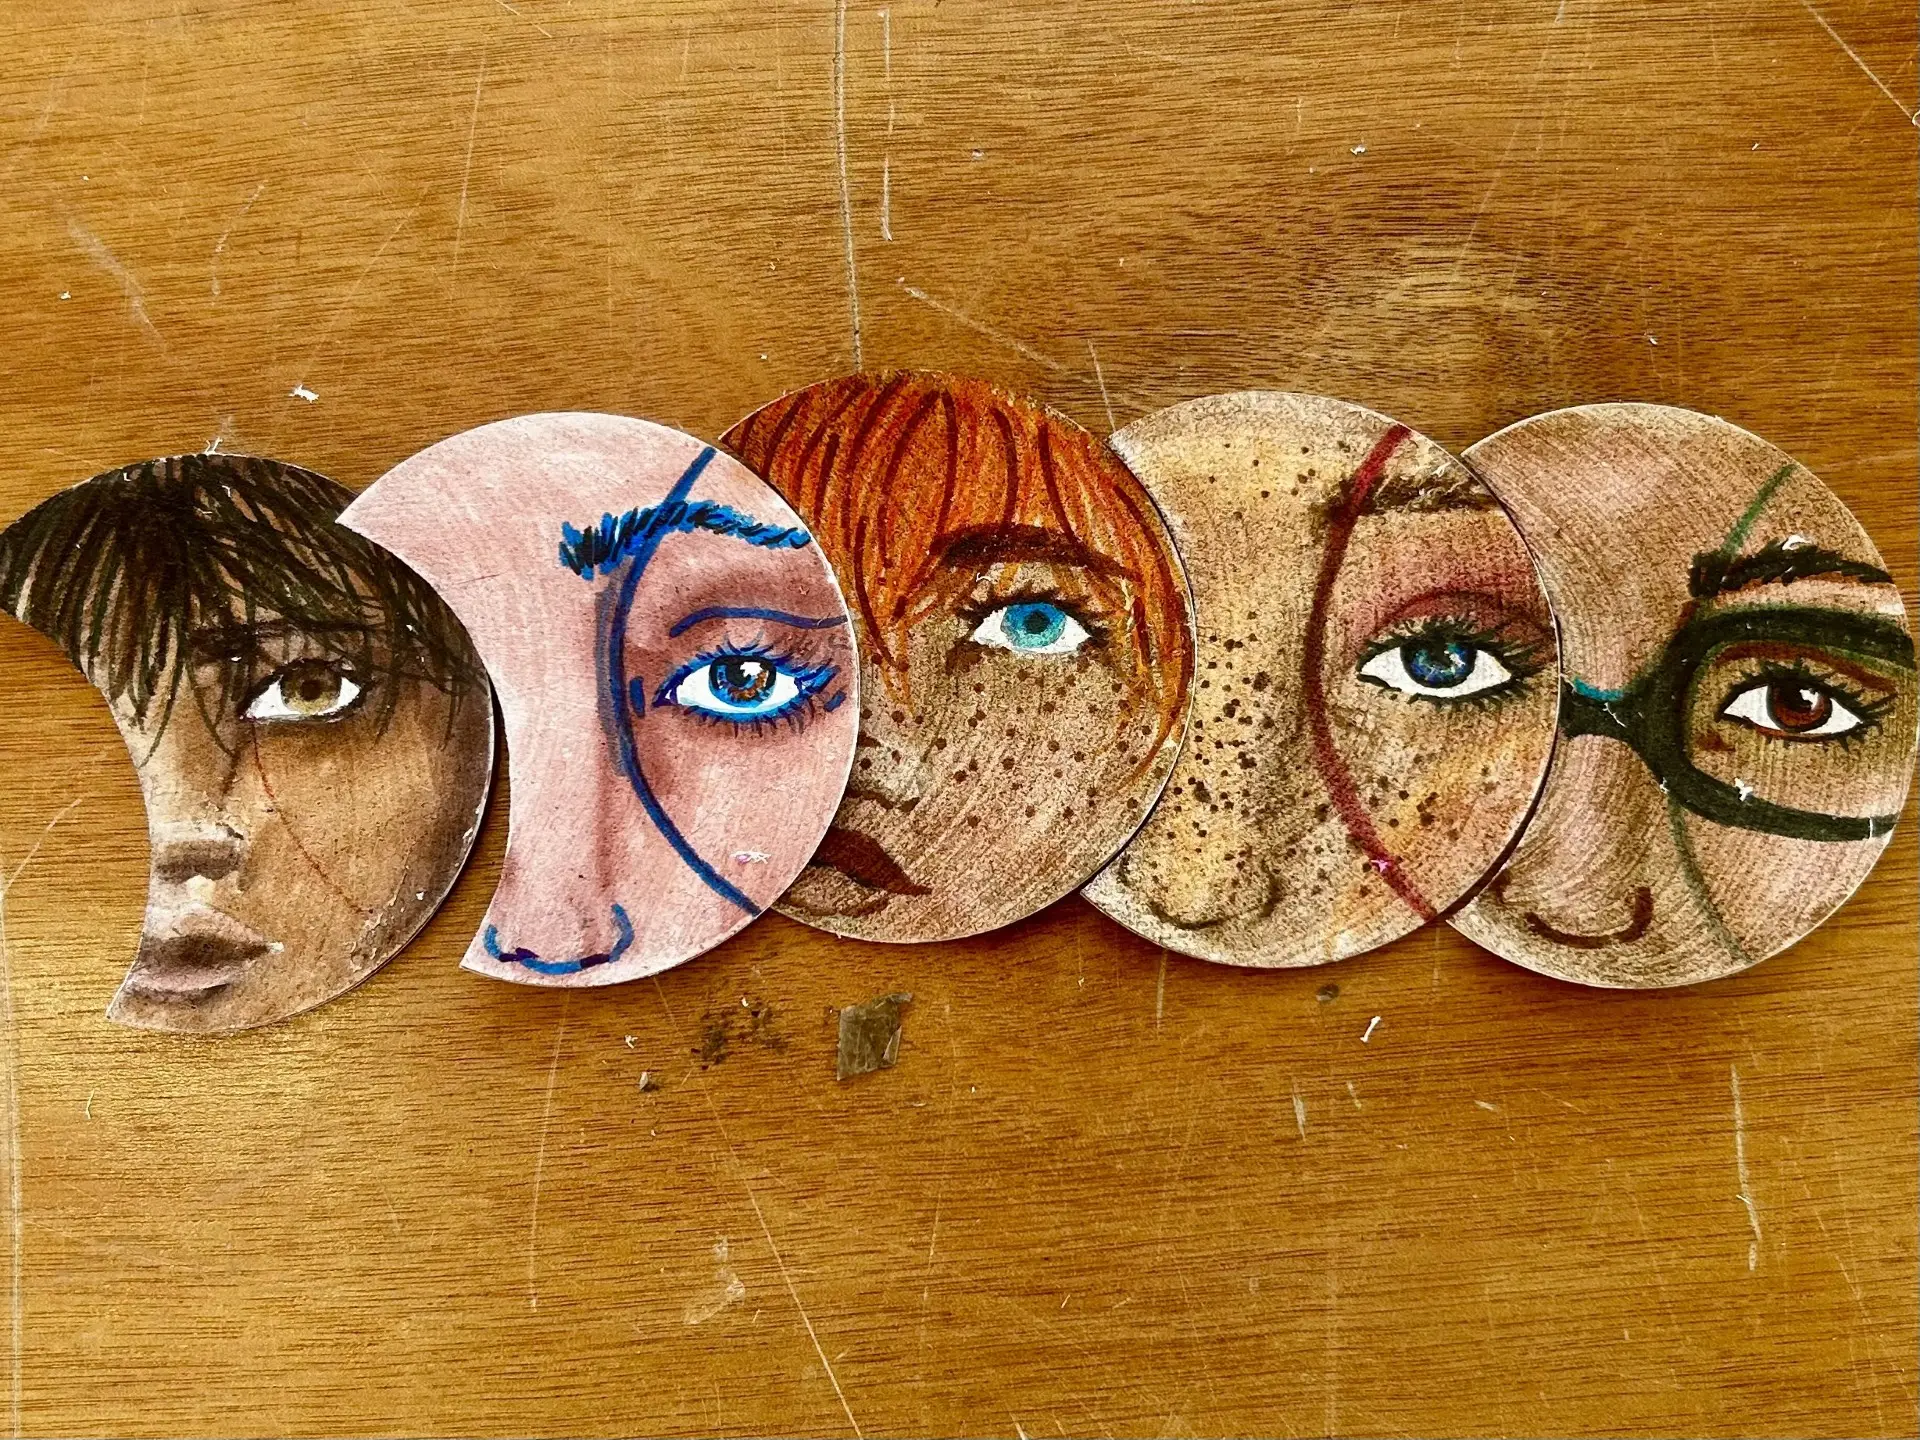 A series of five overlapping crescent-shaped paintings of faces overlap on a wood tabletop.